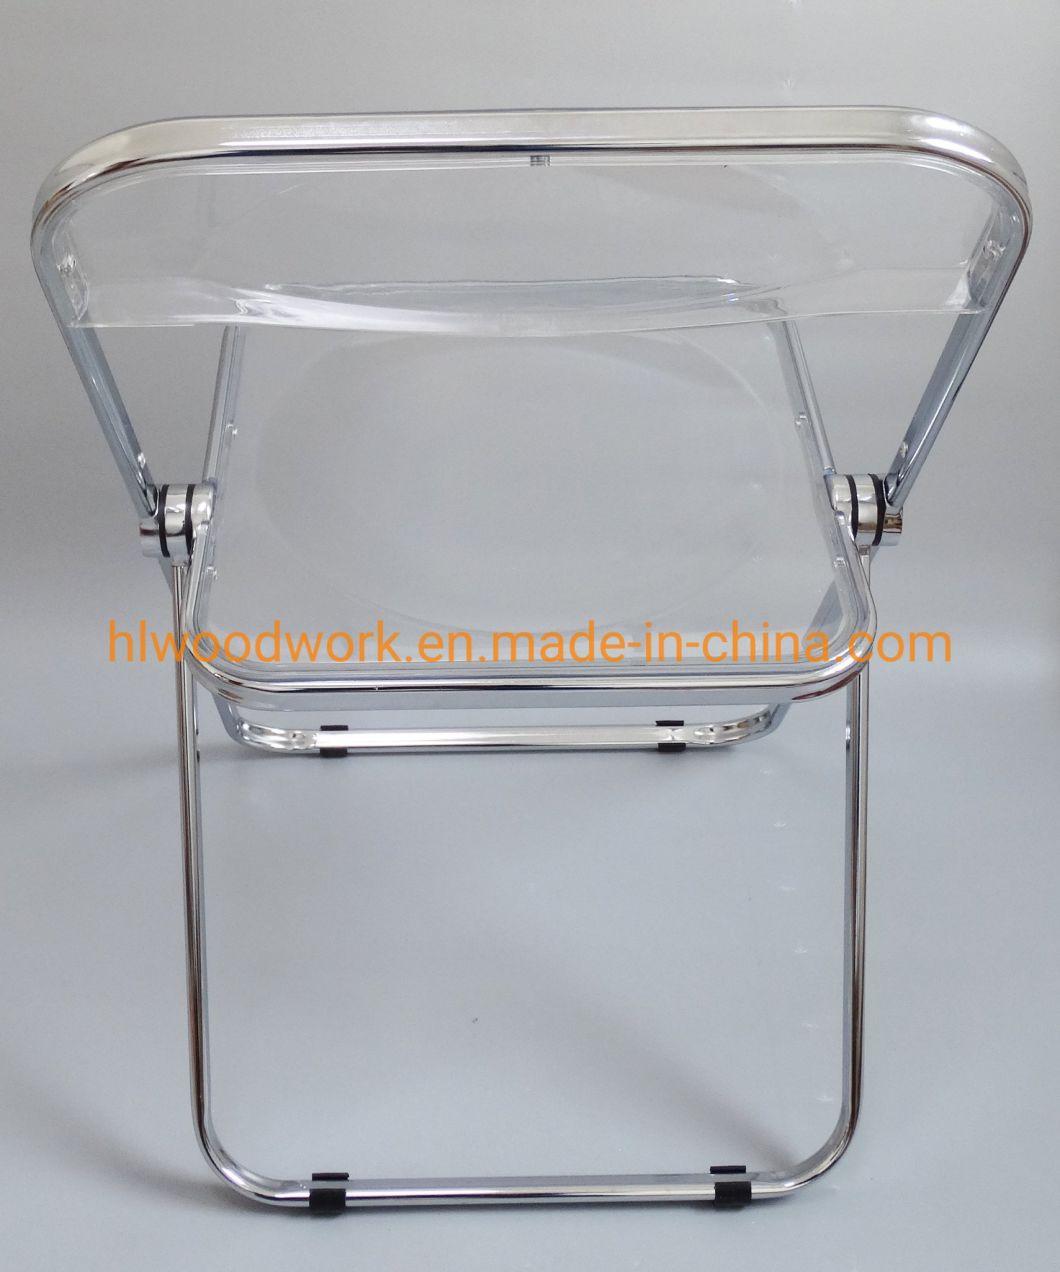 Modern Transparent White Folding Chair PC Plastic Study Chair Chrome Frame Office Bar Dining Leisure Banquet Wedding Meeting Chair Plastic Dining Chair